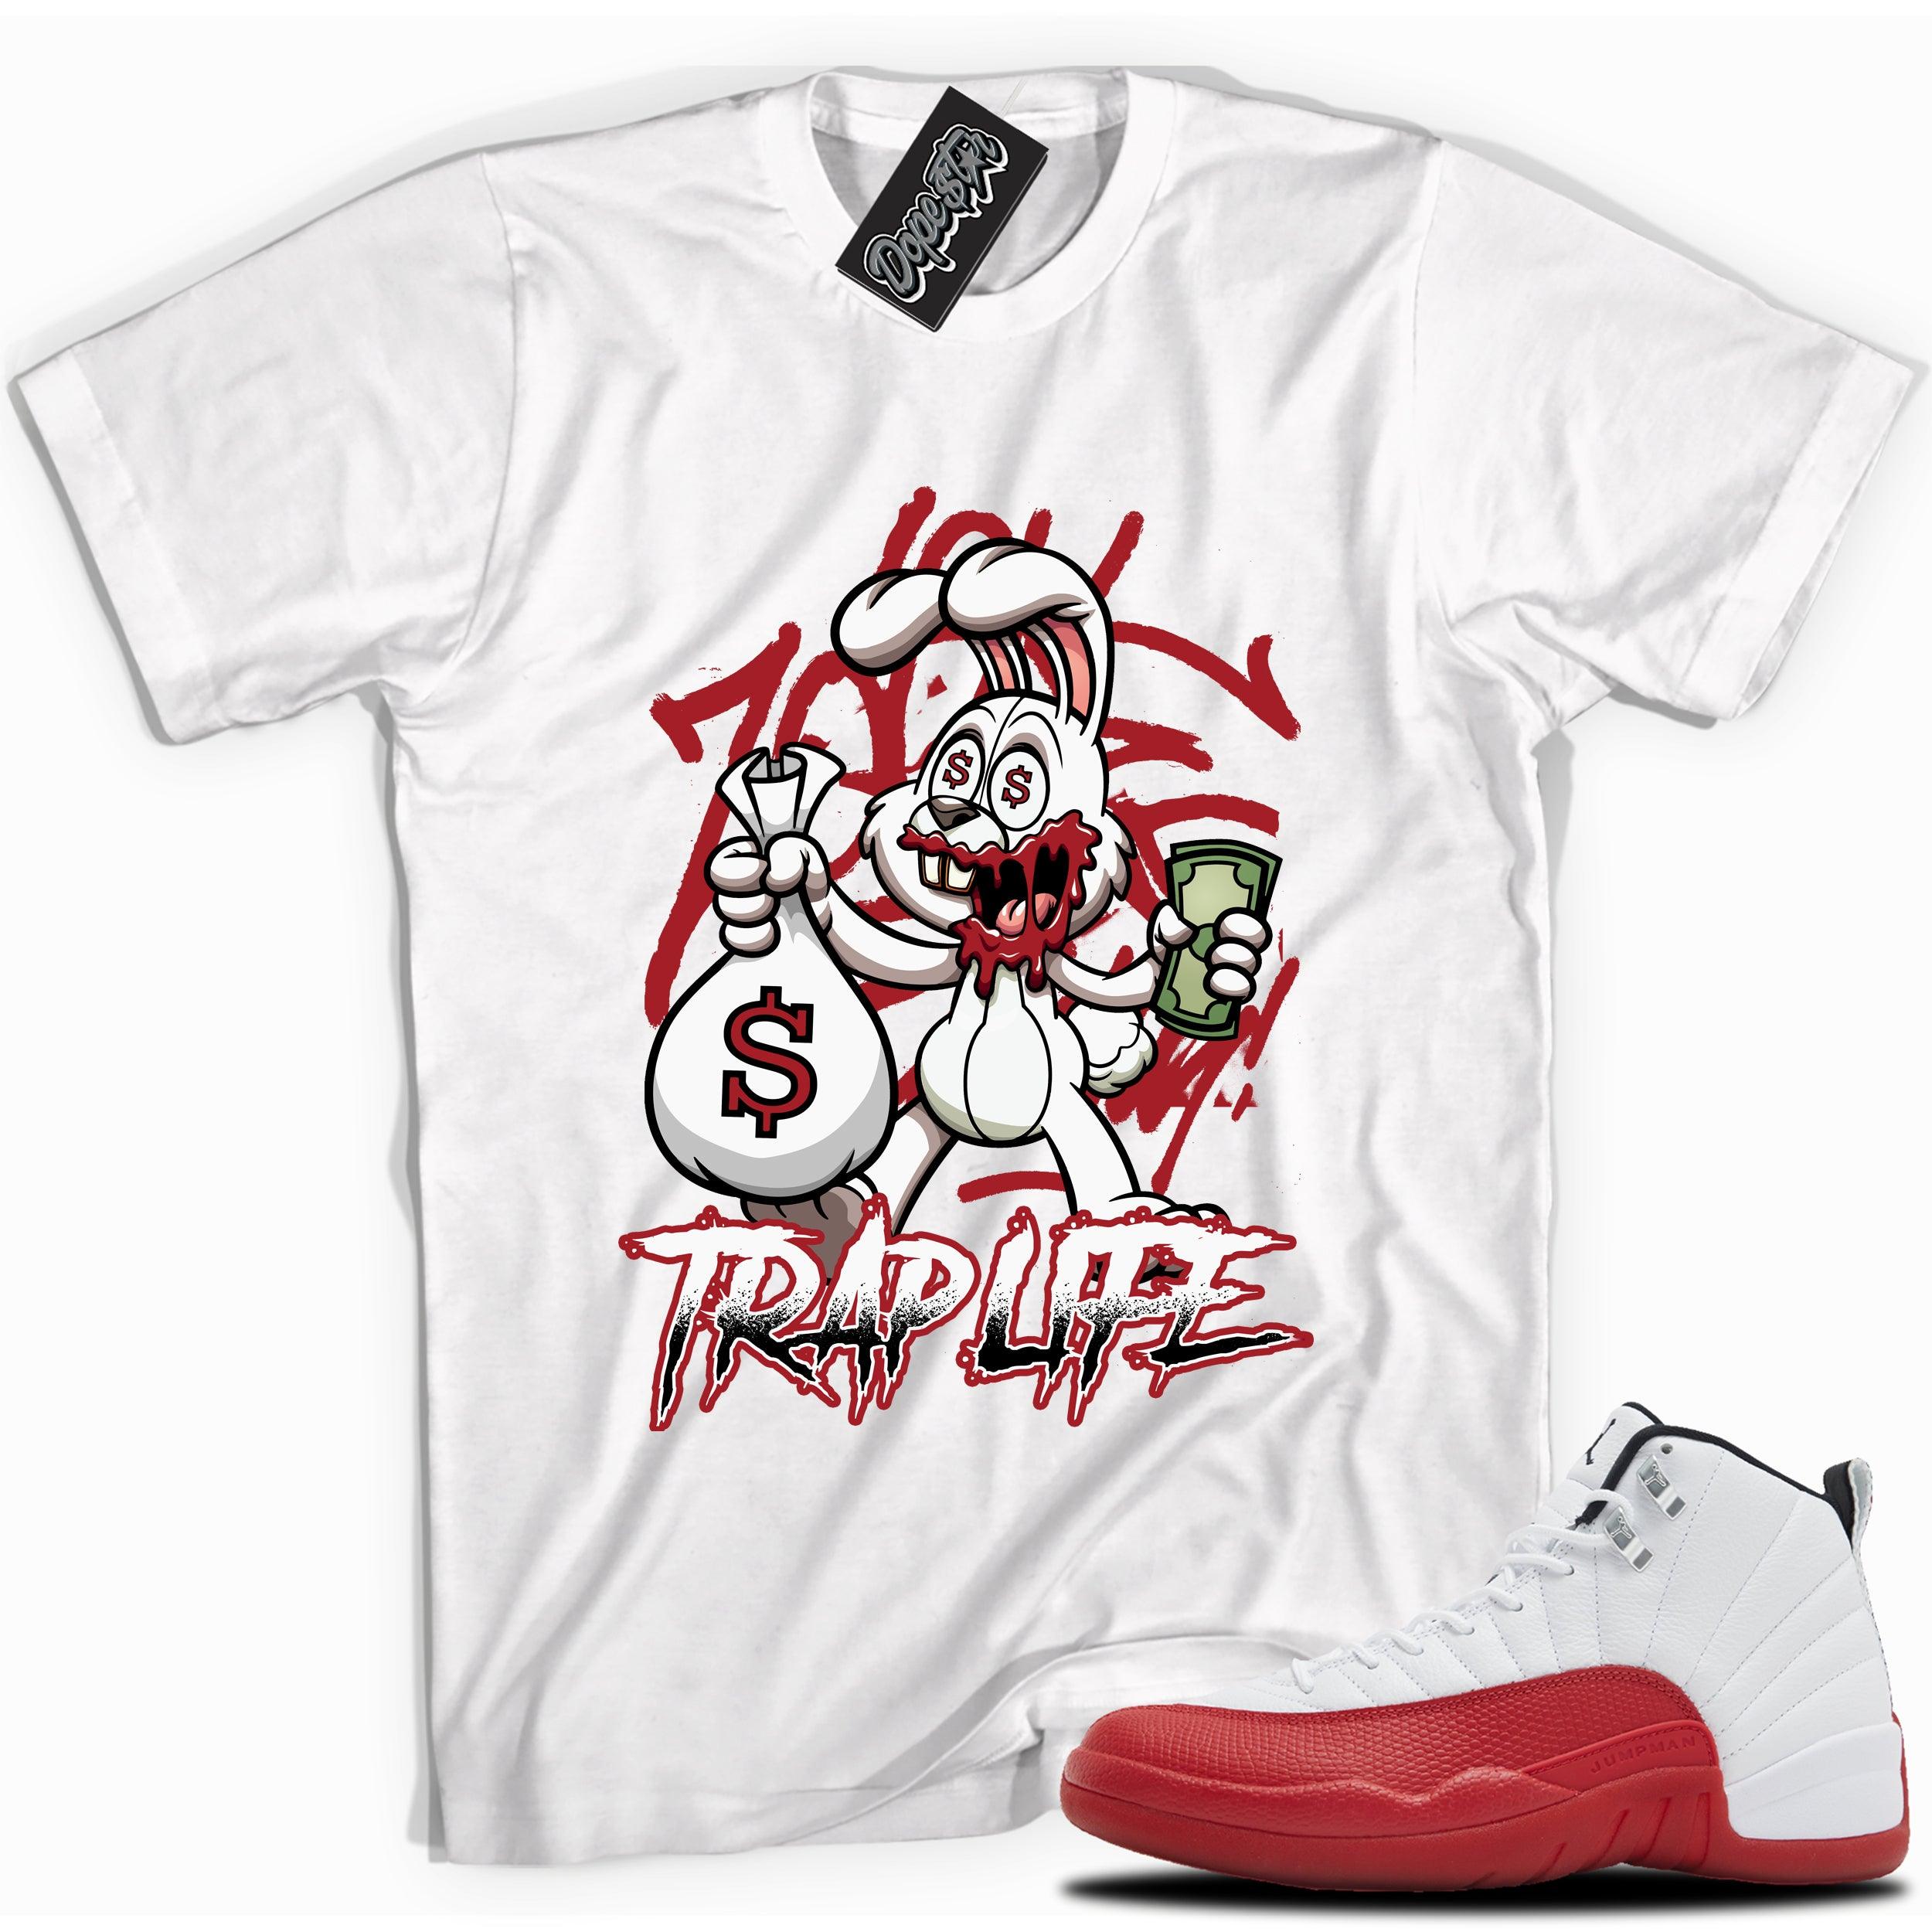 Cool White graphic tee with “Trap Rabbit” print, that perfectly matches Air Jordan 12 Retro Cherry Red 2023 red and white sneakers 